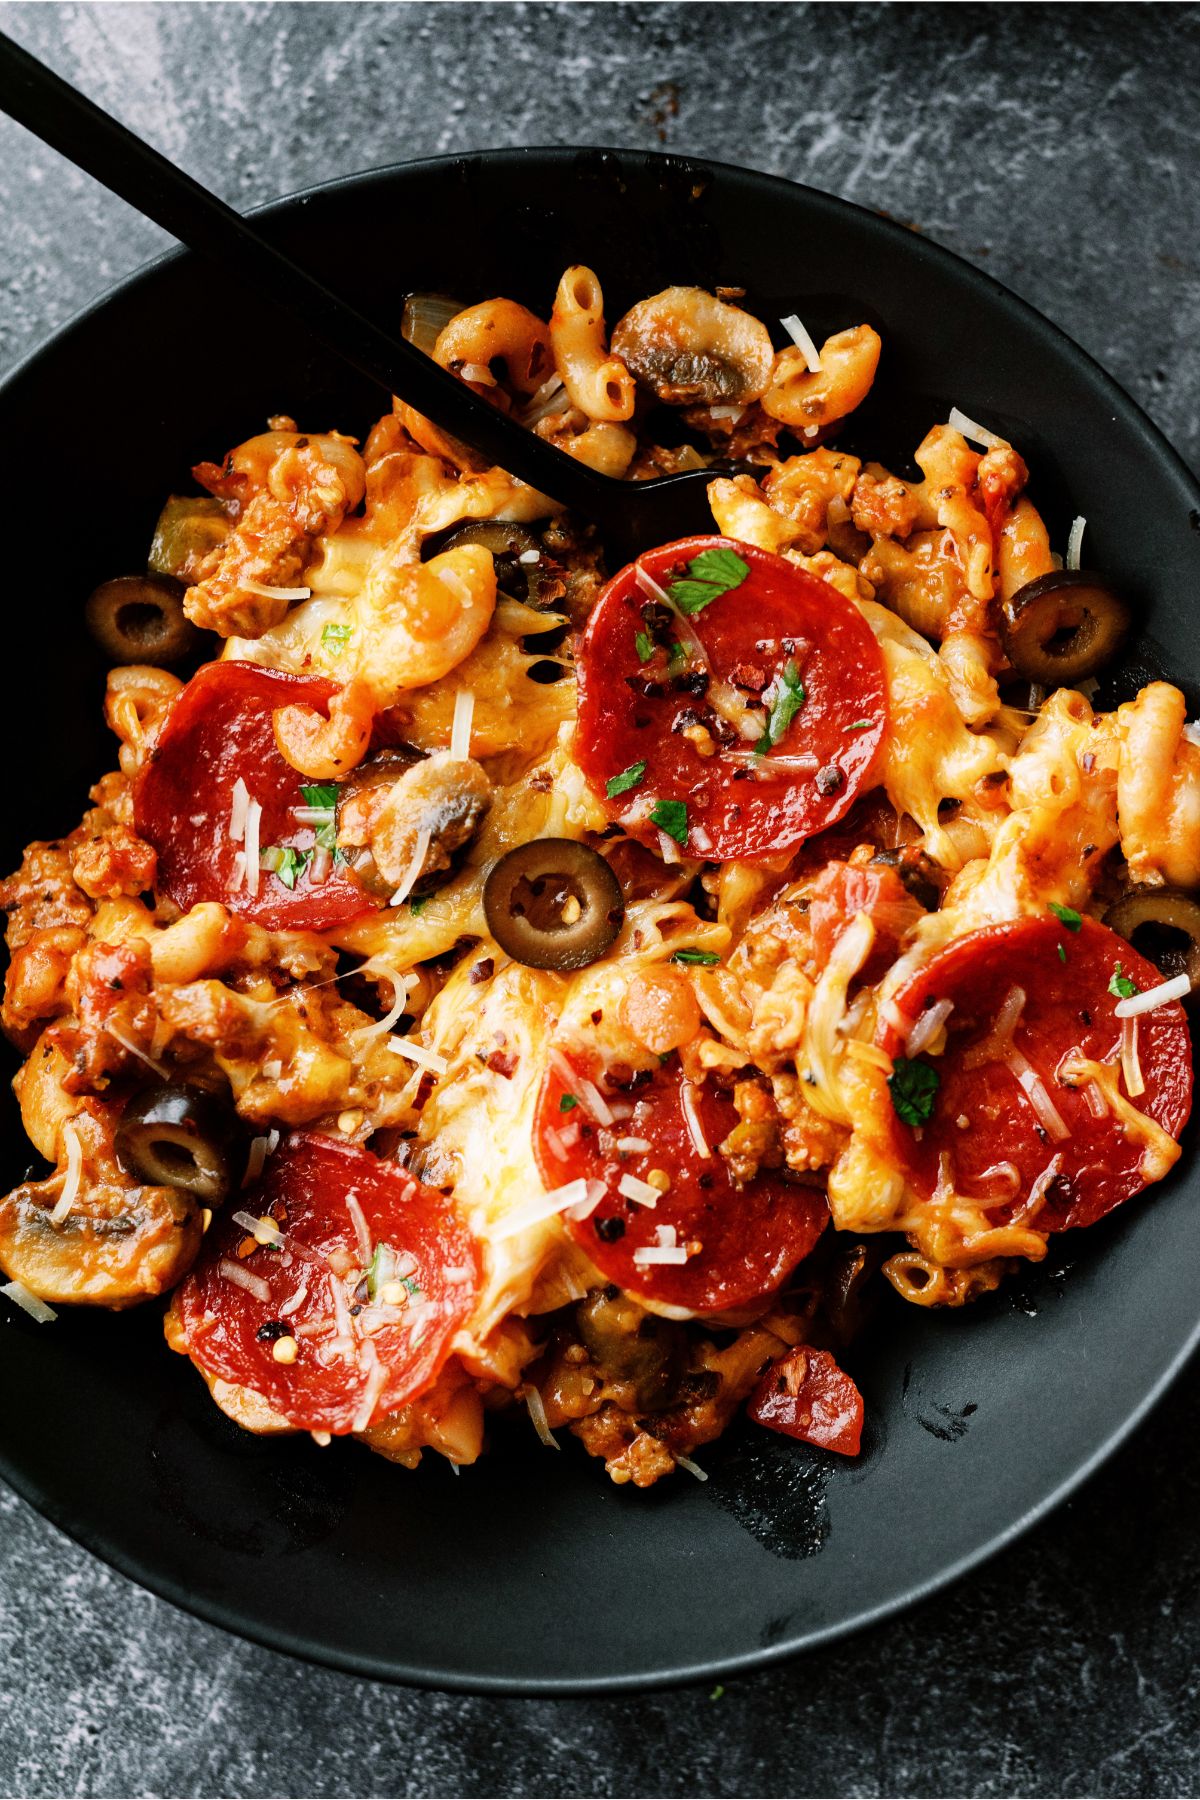 Top view of a serving of Pizza Skillet Pasta in a bowl